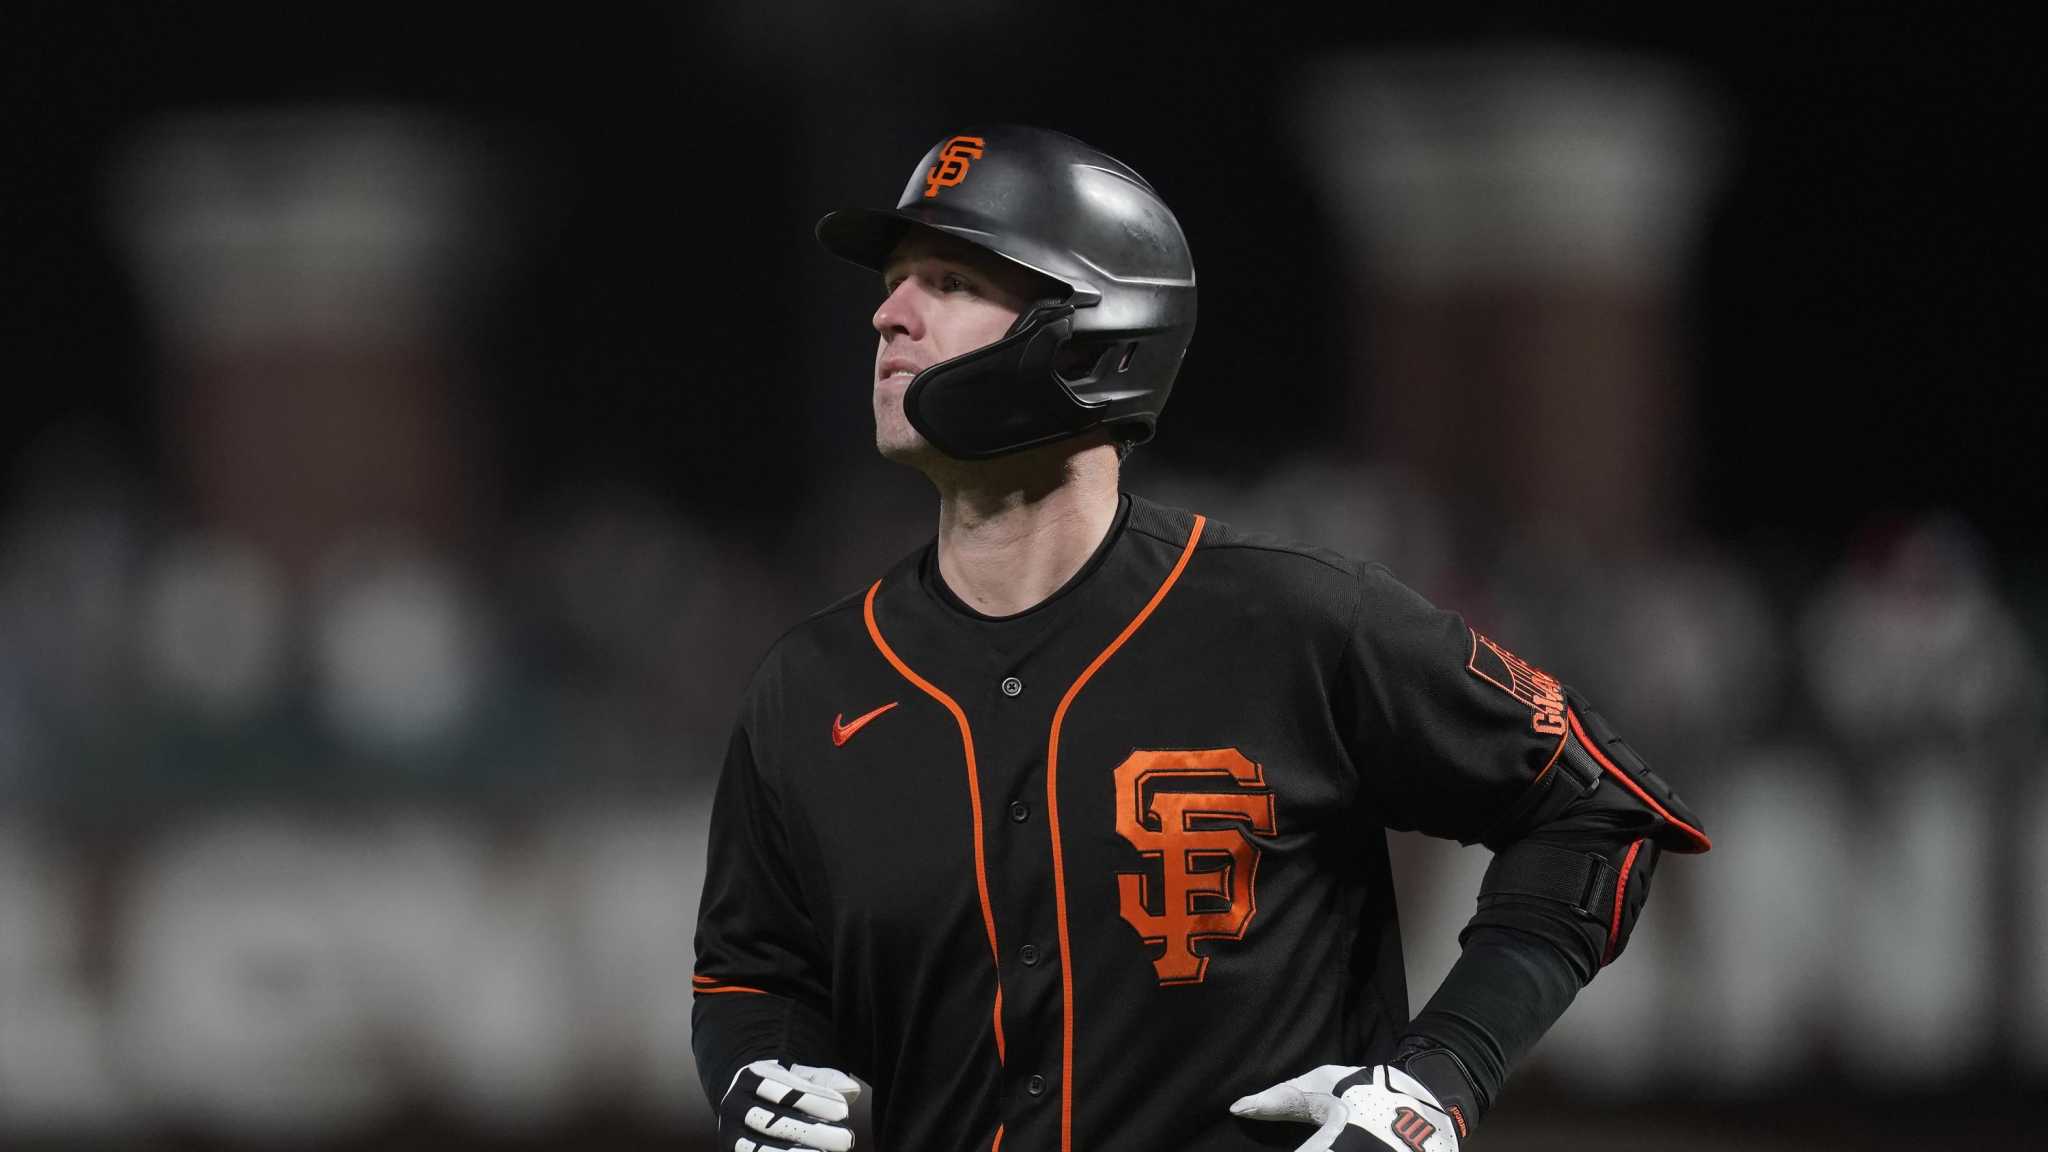 Encouraging news for Giants: no concussion for Buster Posey, could